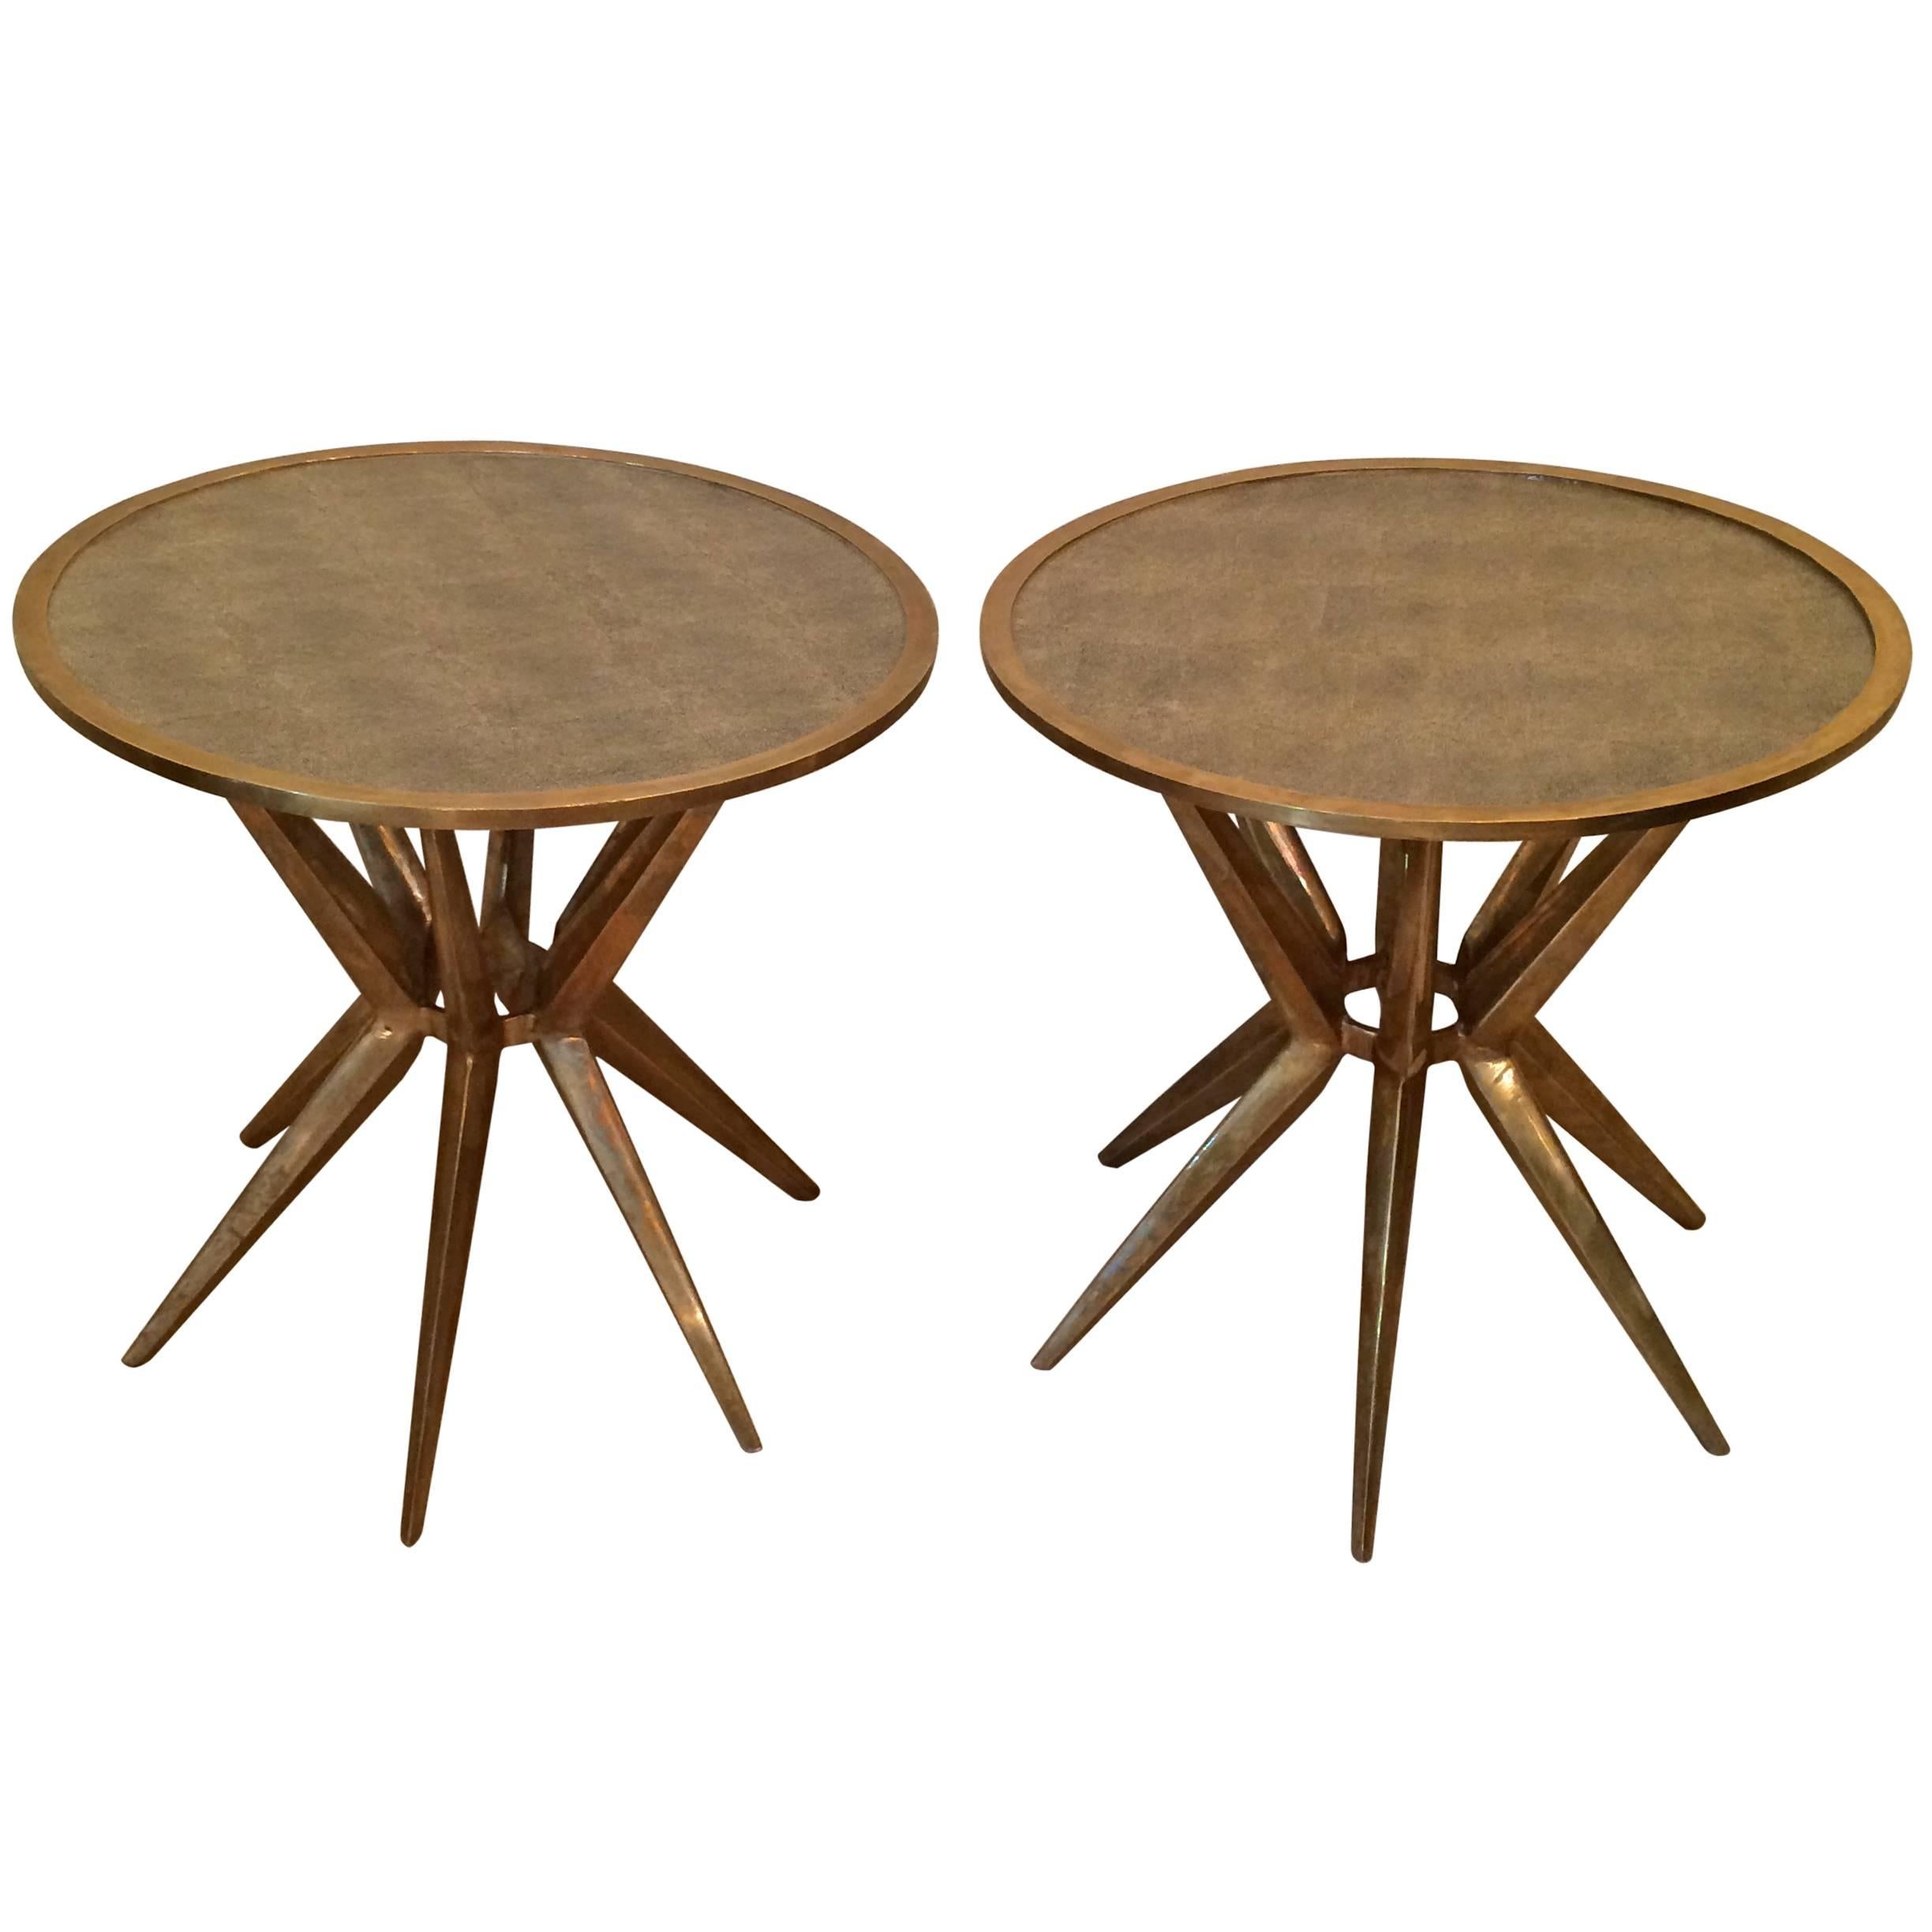 Pair of Bronze and Galuchat Side Tables